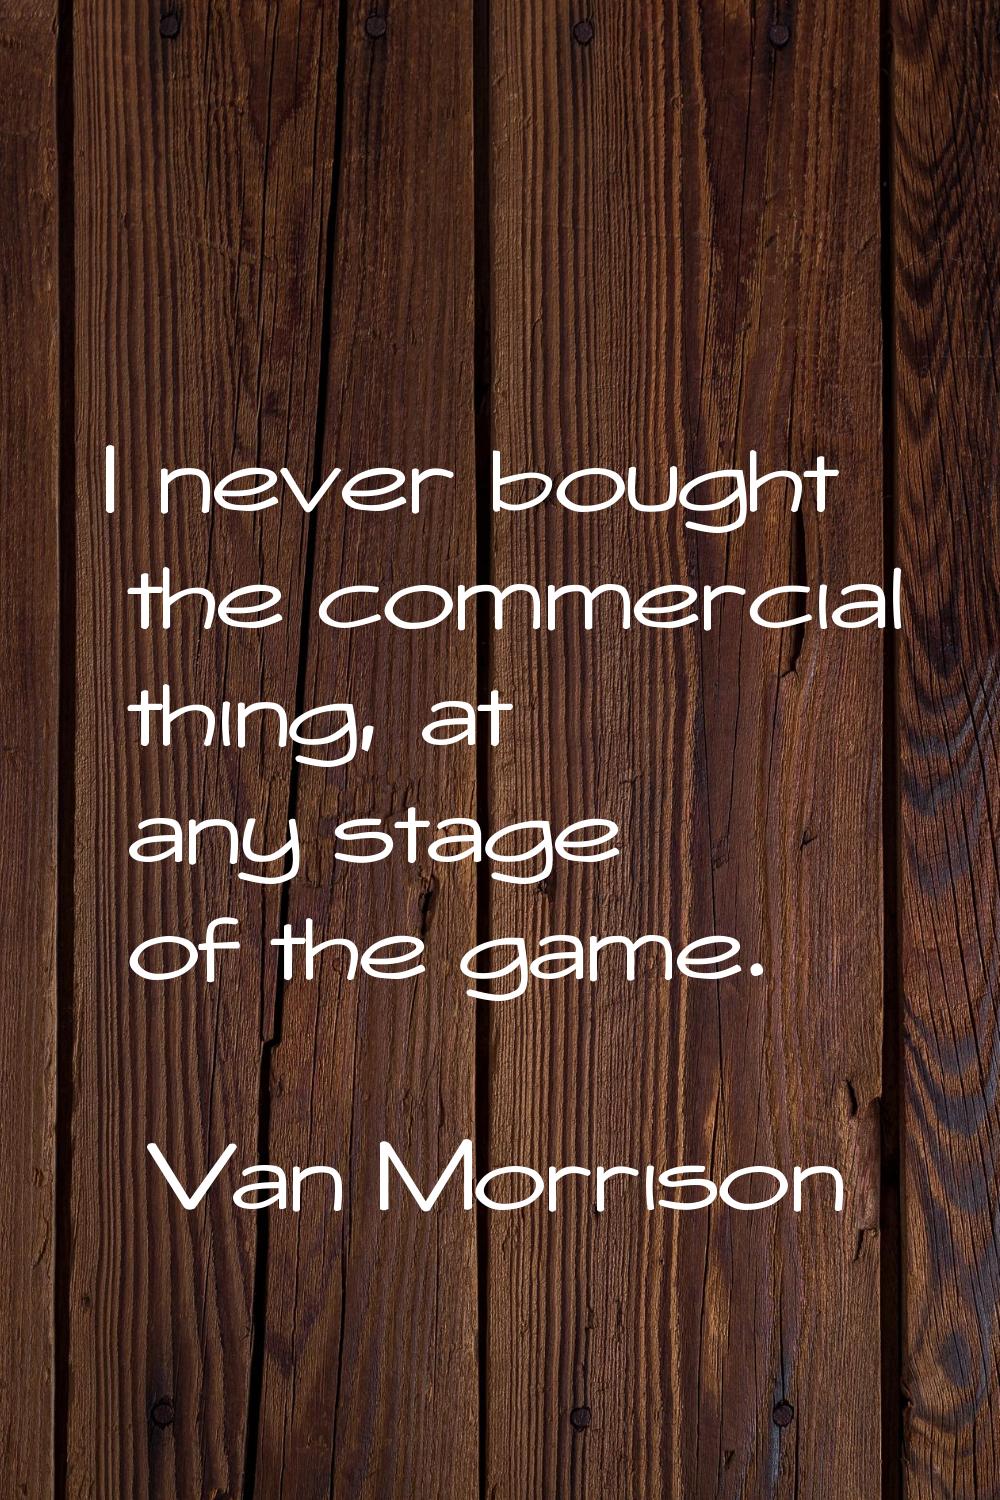 I never bought the commercial thing, at any stage of the game.